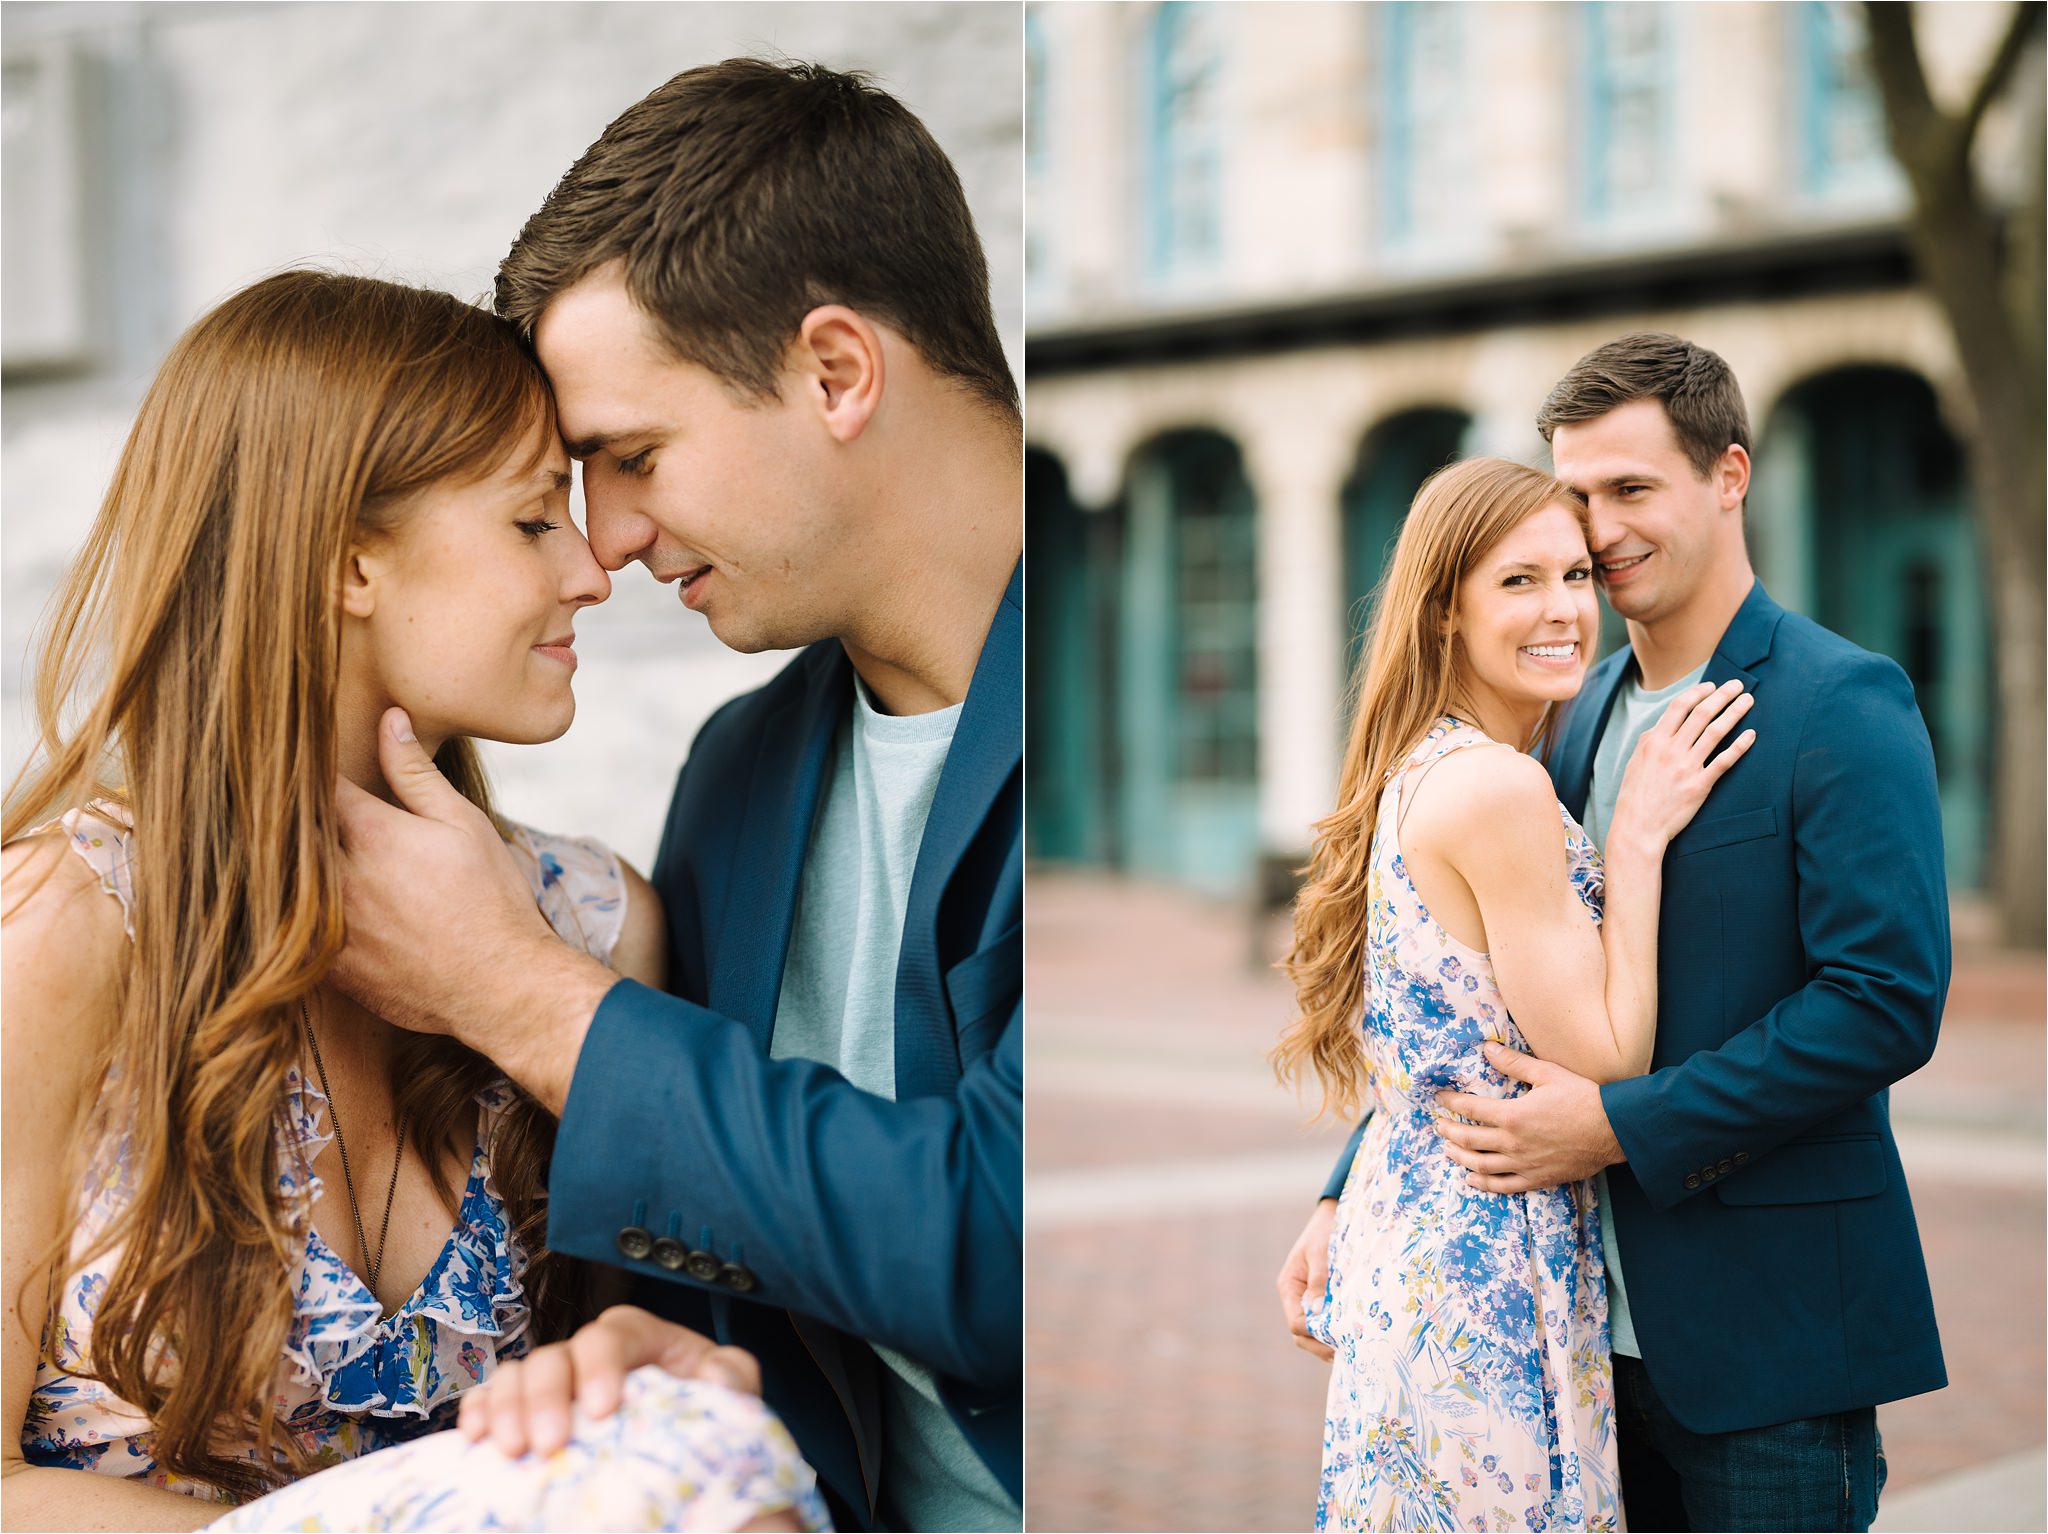 Romantic couple embracing in Minneapolis St Anthony Main engagement photos